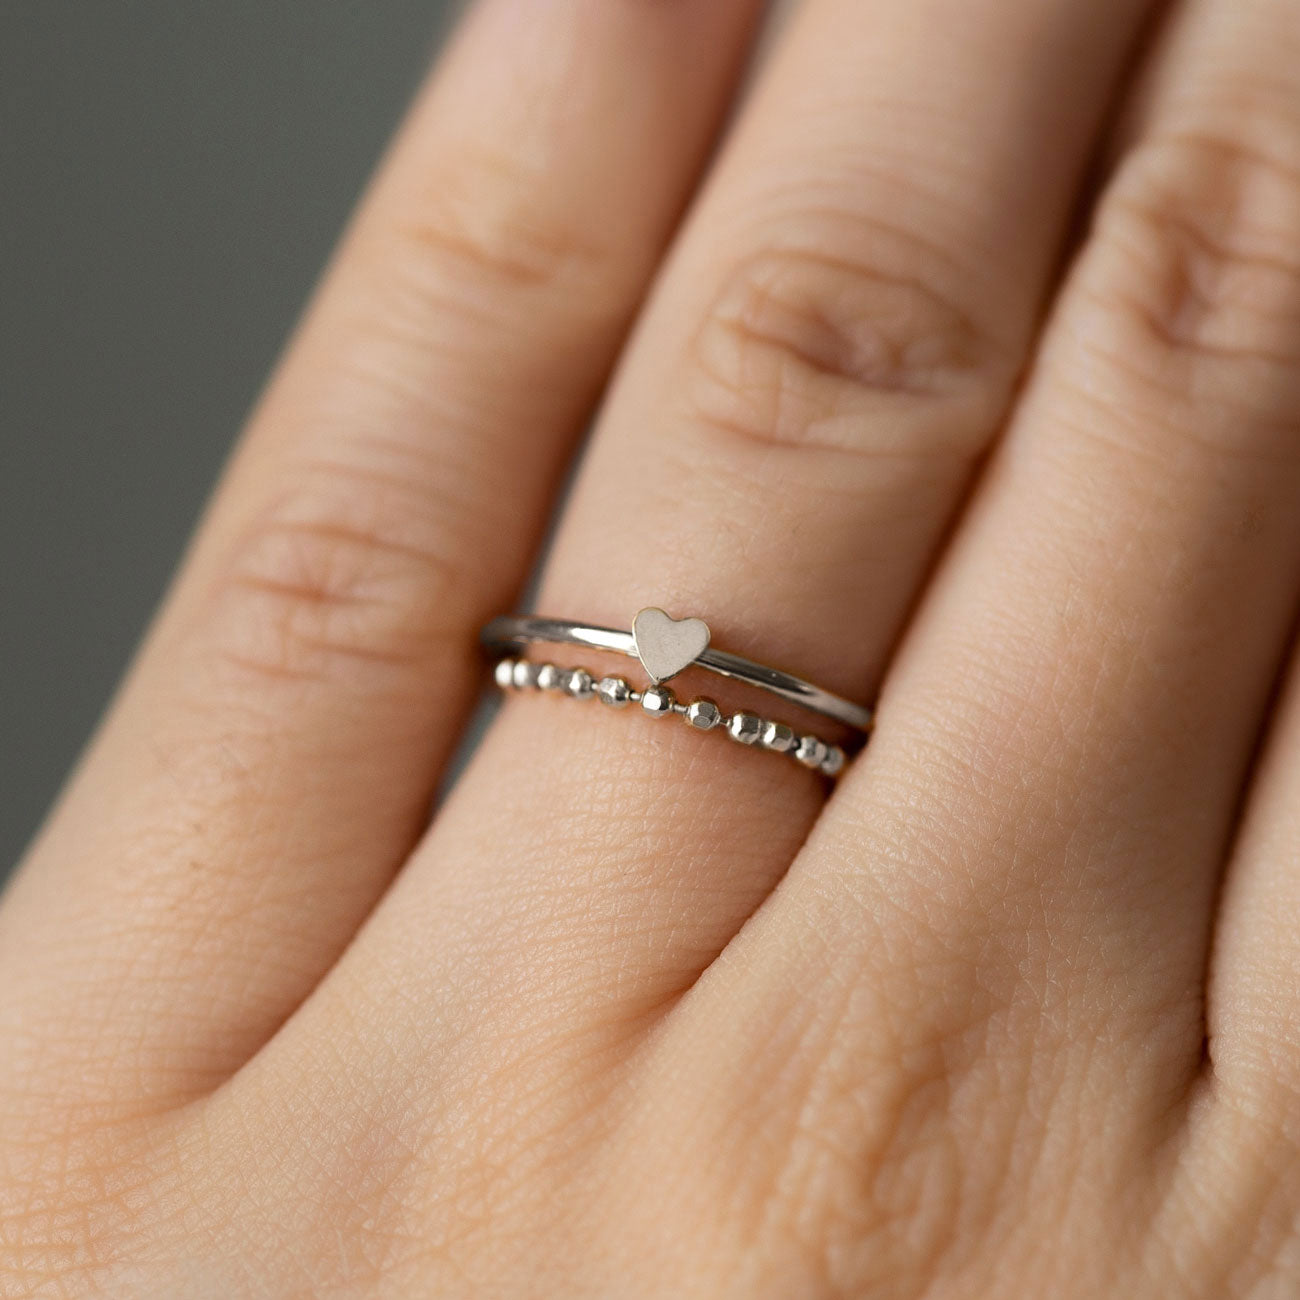 Minimalist Tiny Heart Ring for Women Sterling Silver Dainty Cute